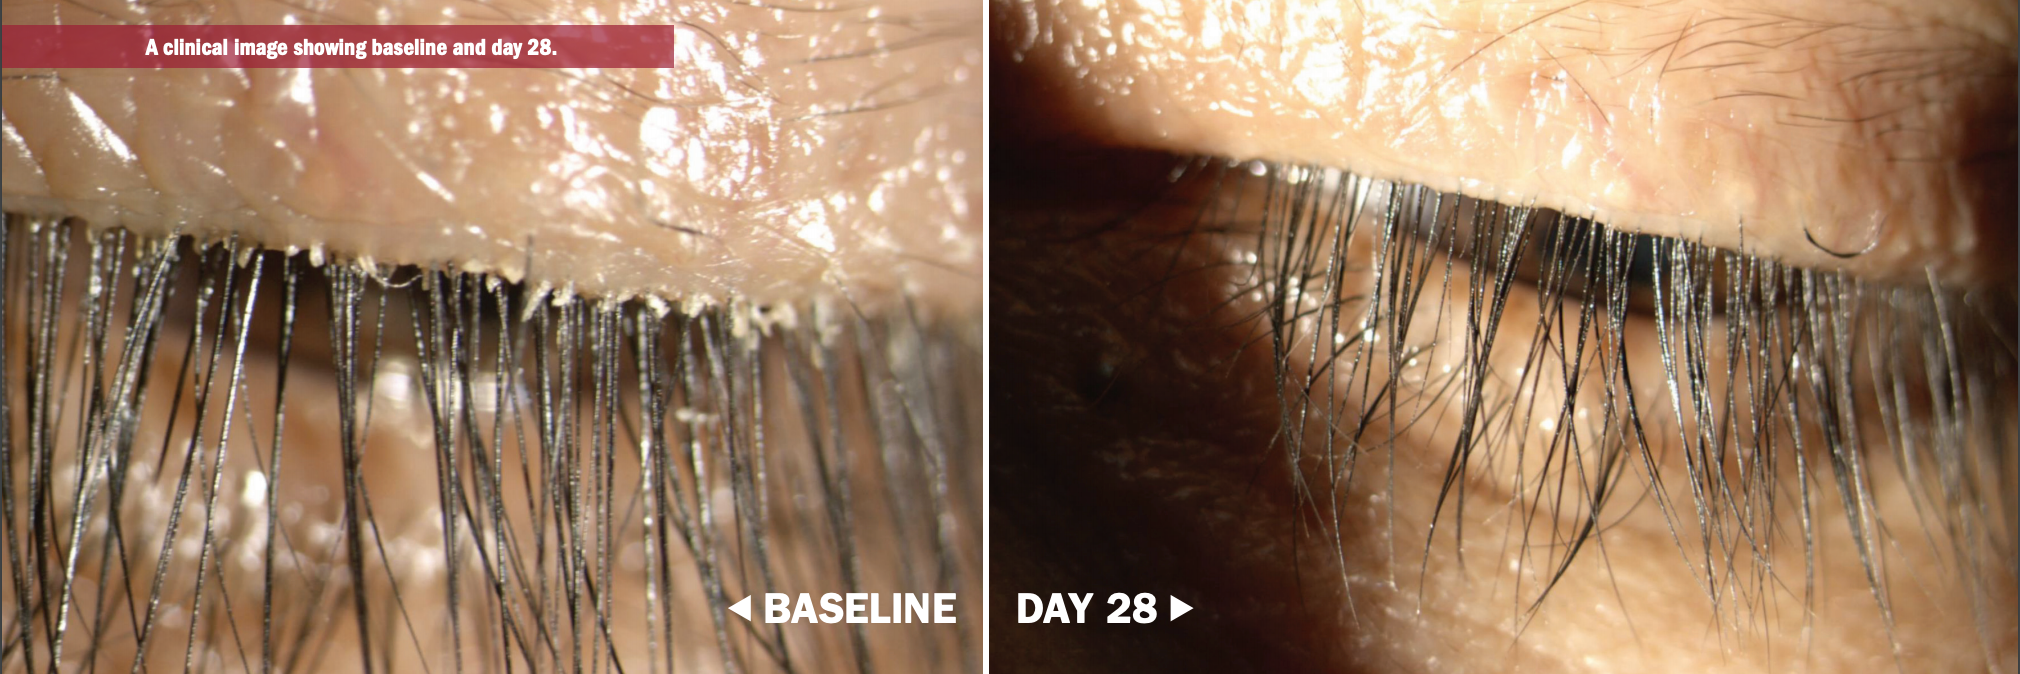 Drop shows effectiveness for Demodex blepharitis in phase 2a study